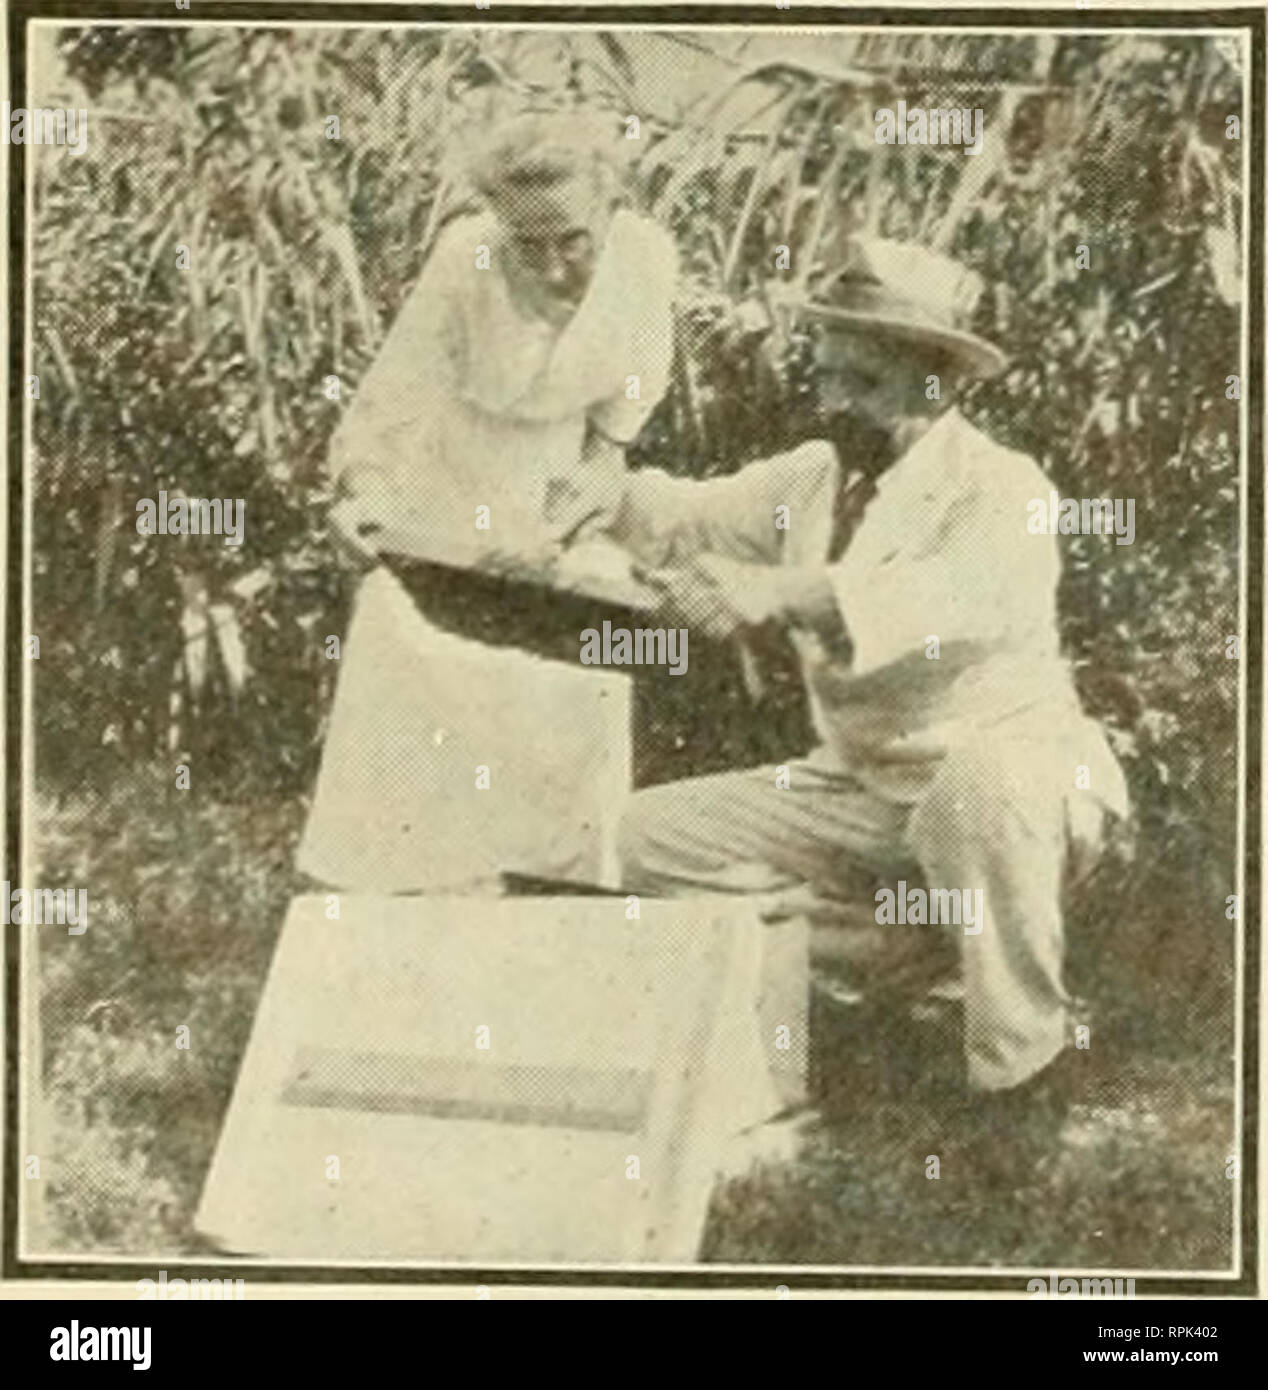 . American bee journal. Bee culture; Bees. MRS. J. T. FITZSIMON AND HER SON IN THEIR SMALL APIARY AT CASTROVILLE, TEX. Miscellaneous ^ News Items. Mr, Brenner, of Texas, Pointing Out the queen Honey Crop of 1916—The monthly crop report of the Department of Agri- culture for November, 191(j, gives a comparison of the average per-colony yield in the years 1915-1916. The total average for 1915, in the entire United States is 42.3 pounds per colony, and in 191(i 52.8, a difference of 10&gt;4 pounds, with an increased spring-count number of colonies of 2.8 percent. The crop of section comb honey is Stock Photo